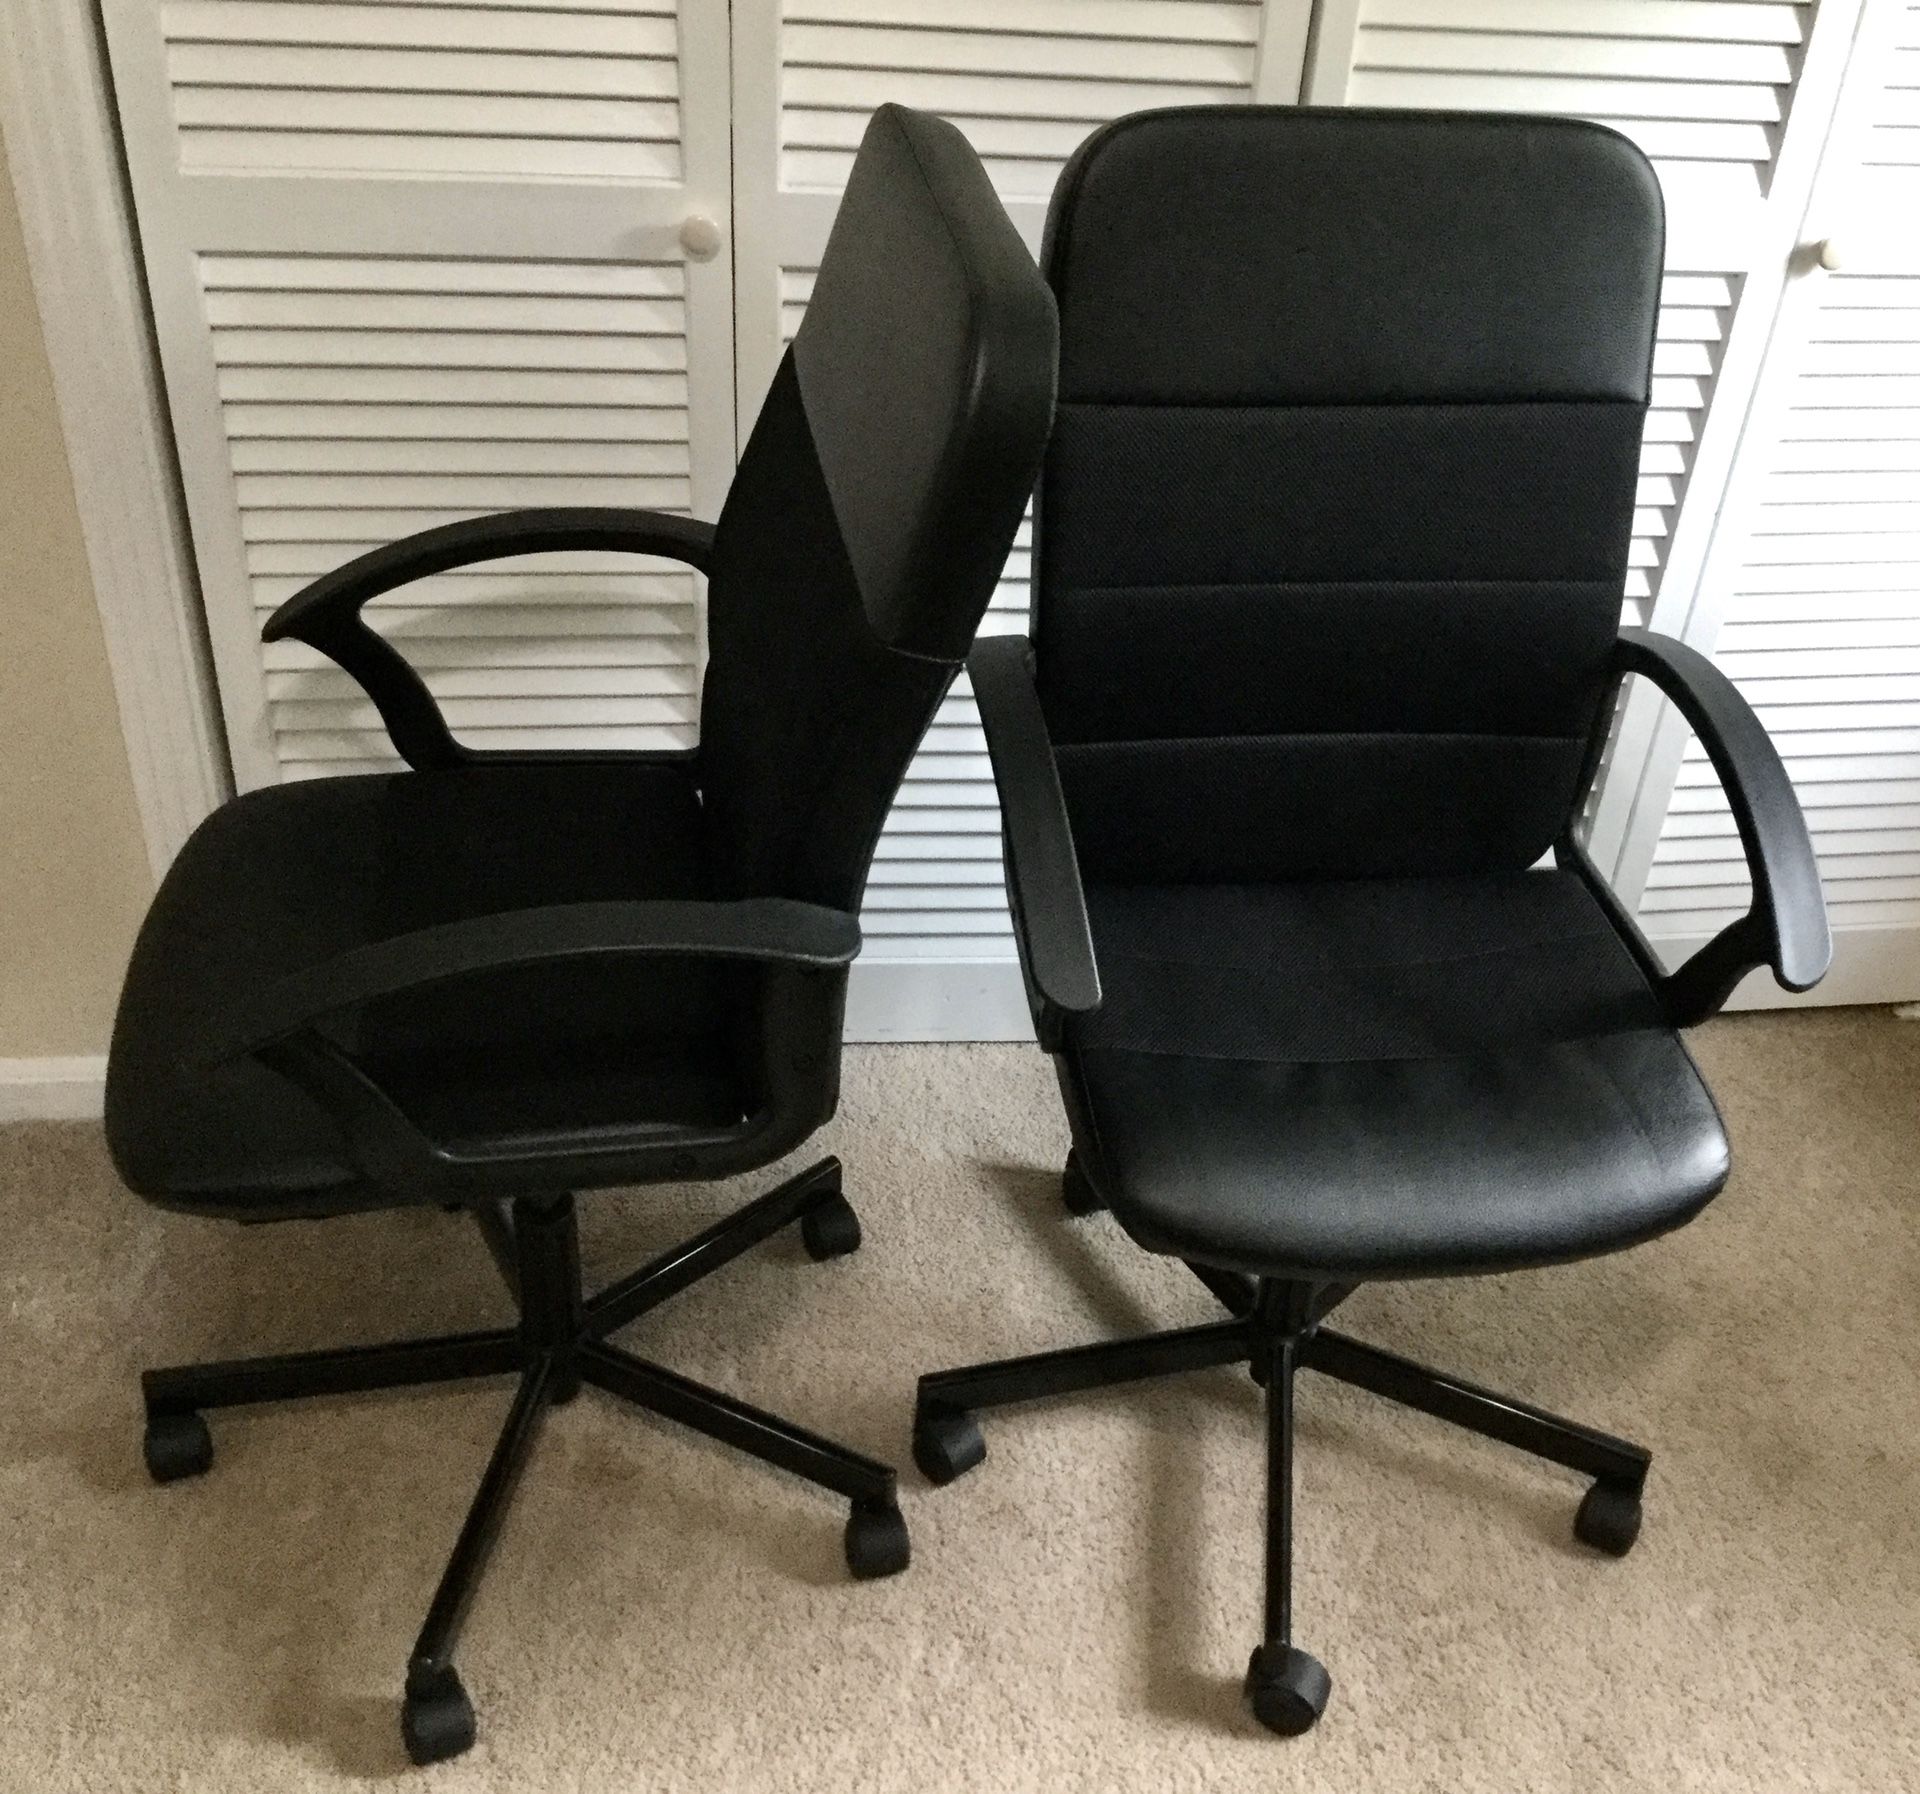 Office chair - one remaining